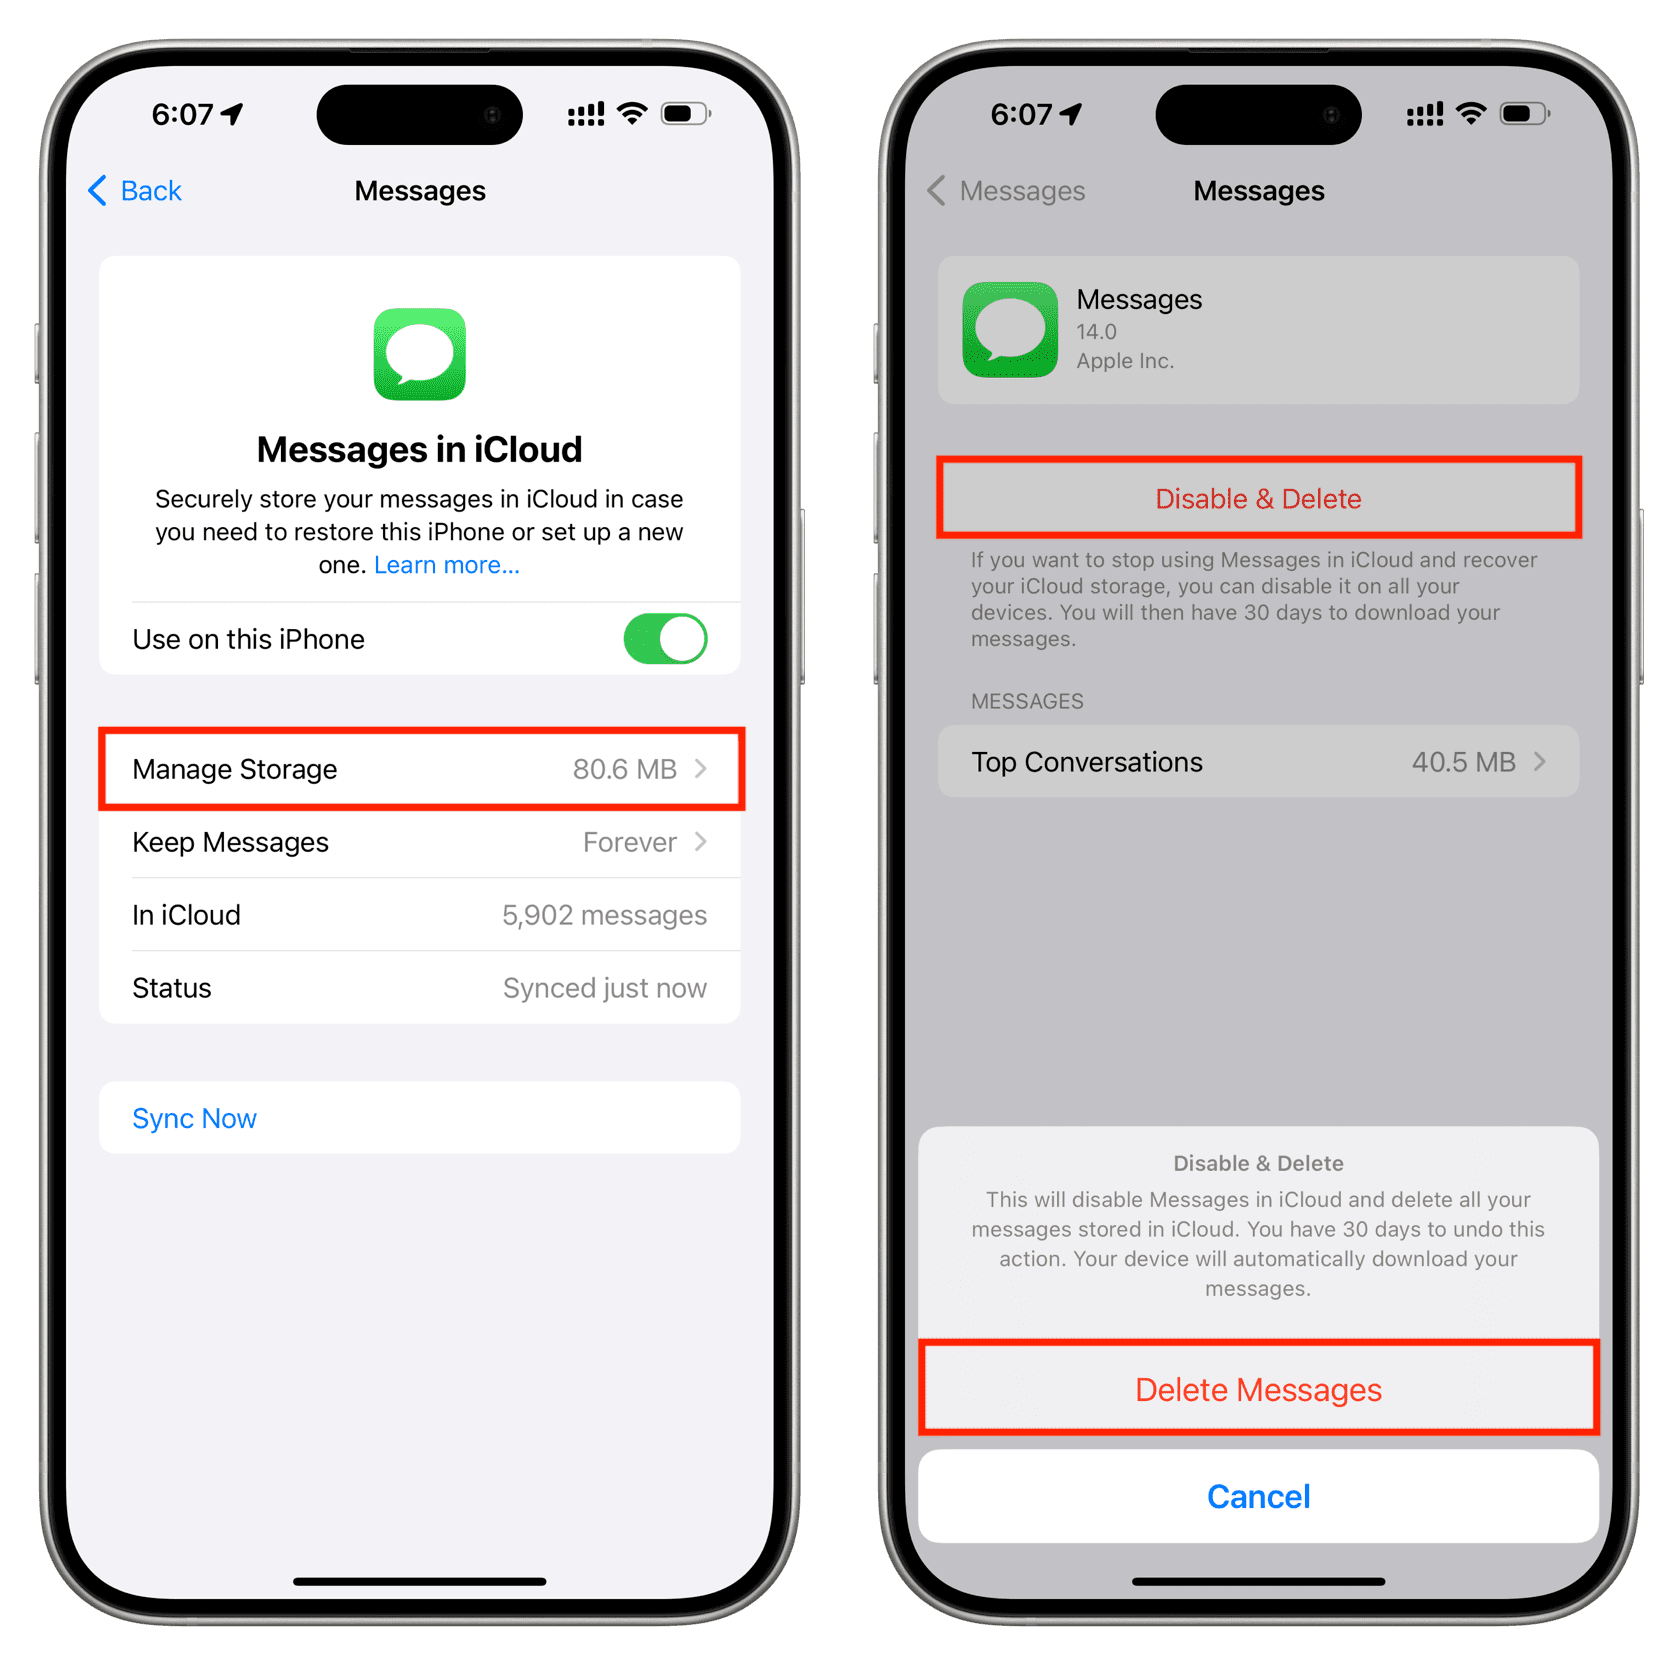 Disable and delete Messages in iCloud for all devices from your iPhone